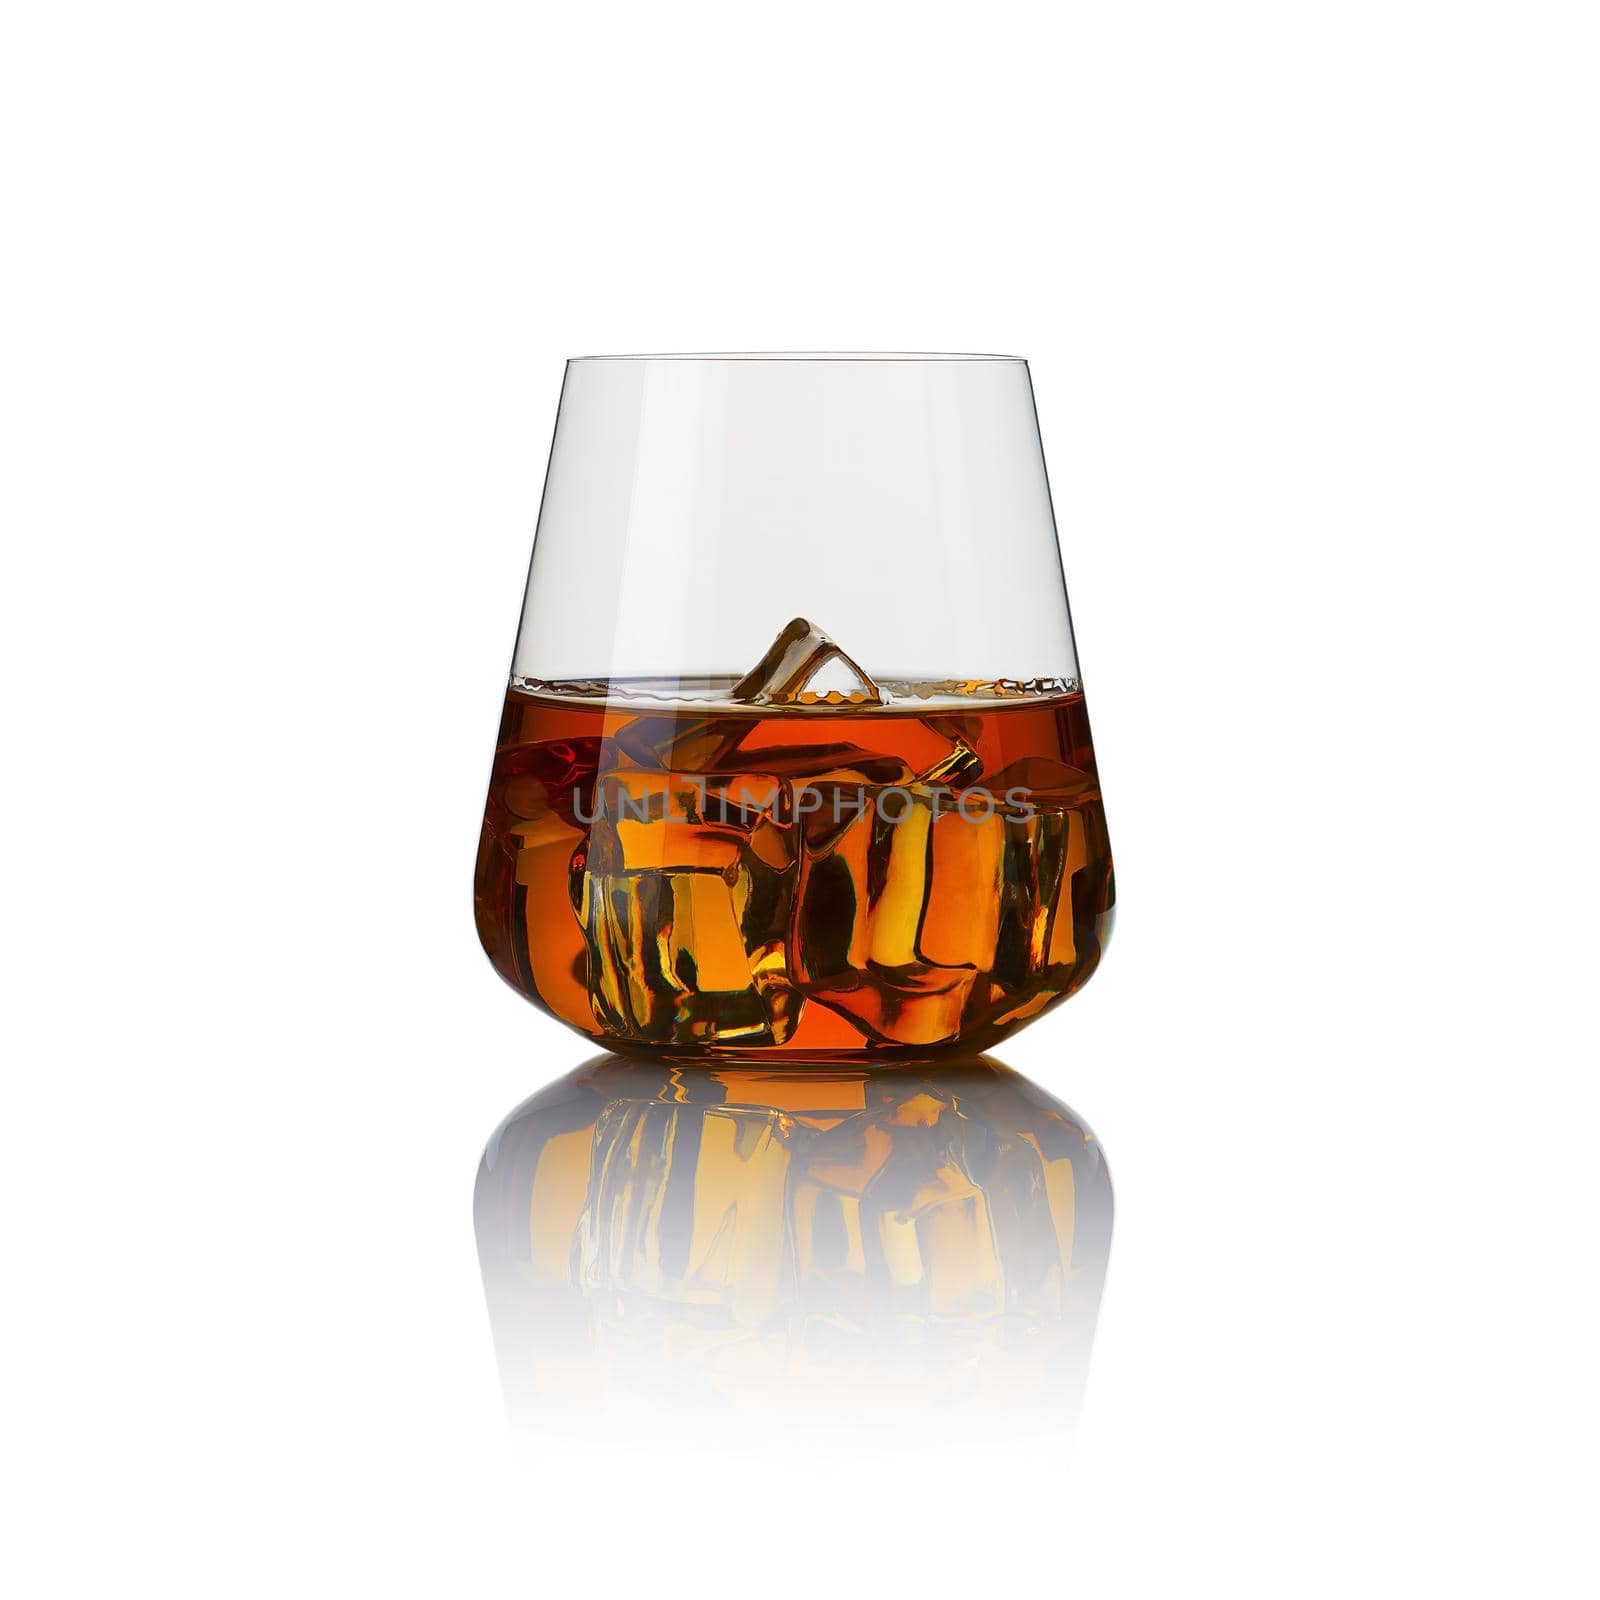 Glass of whisky - with ice and reflection, studio shot by PhotoTime